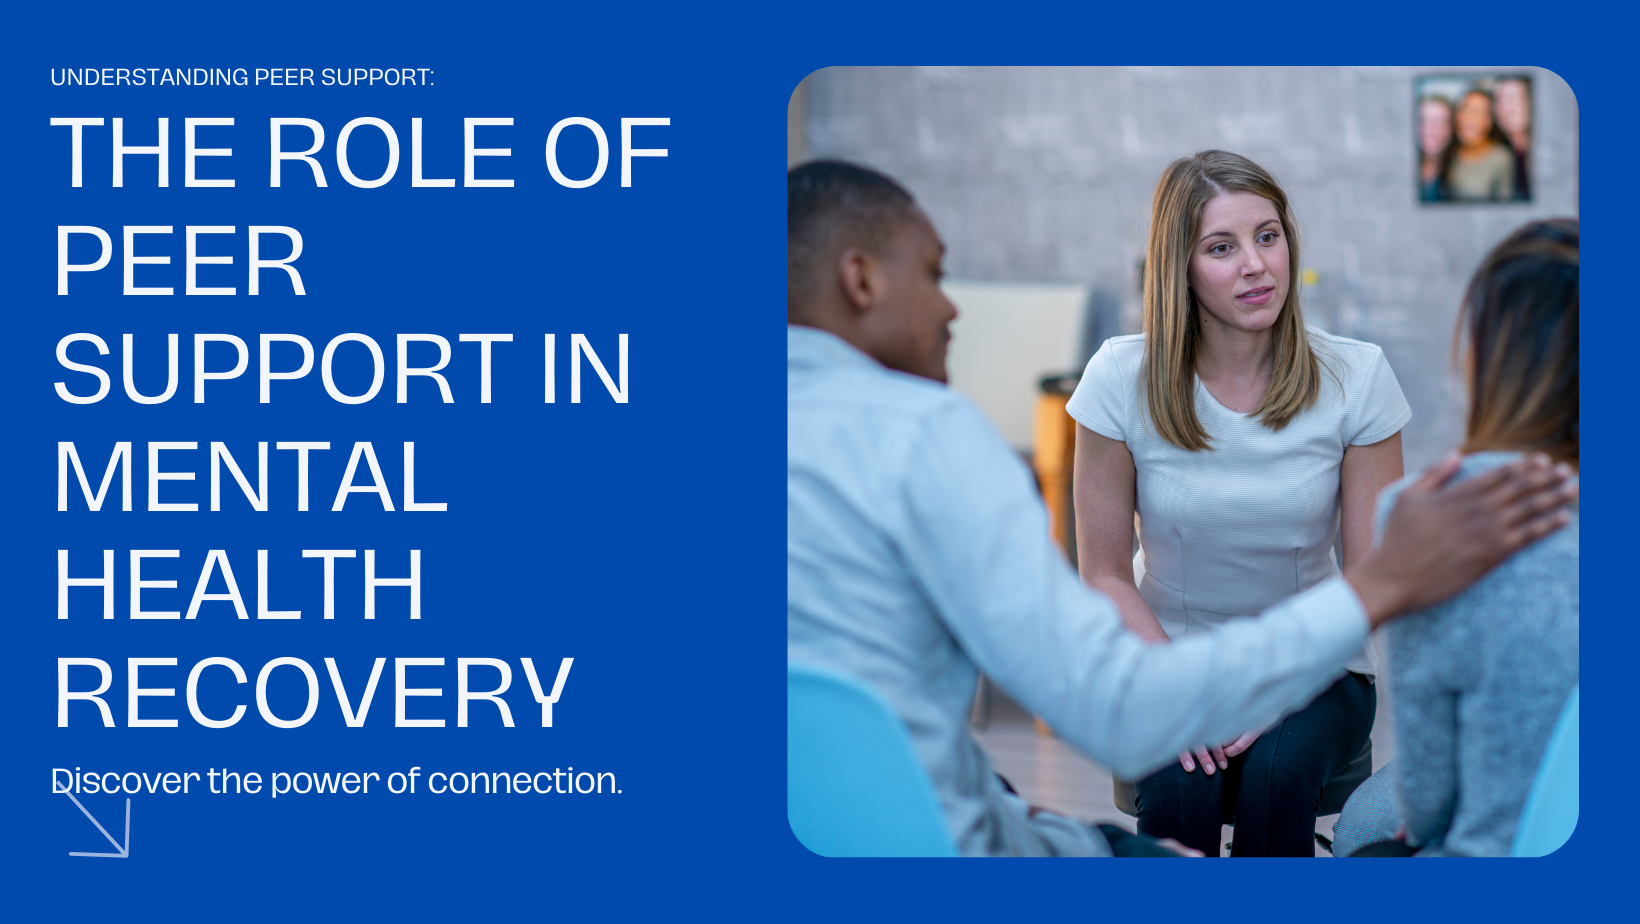 The Role of Peer Support in Mental Health Recovery